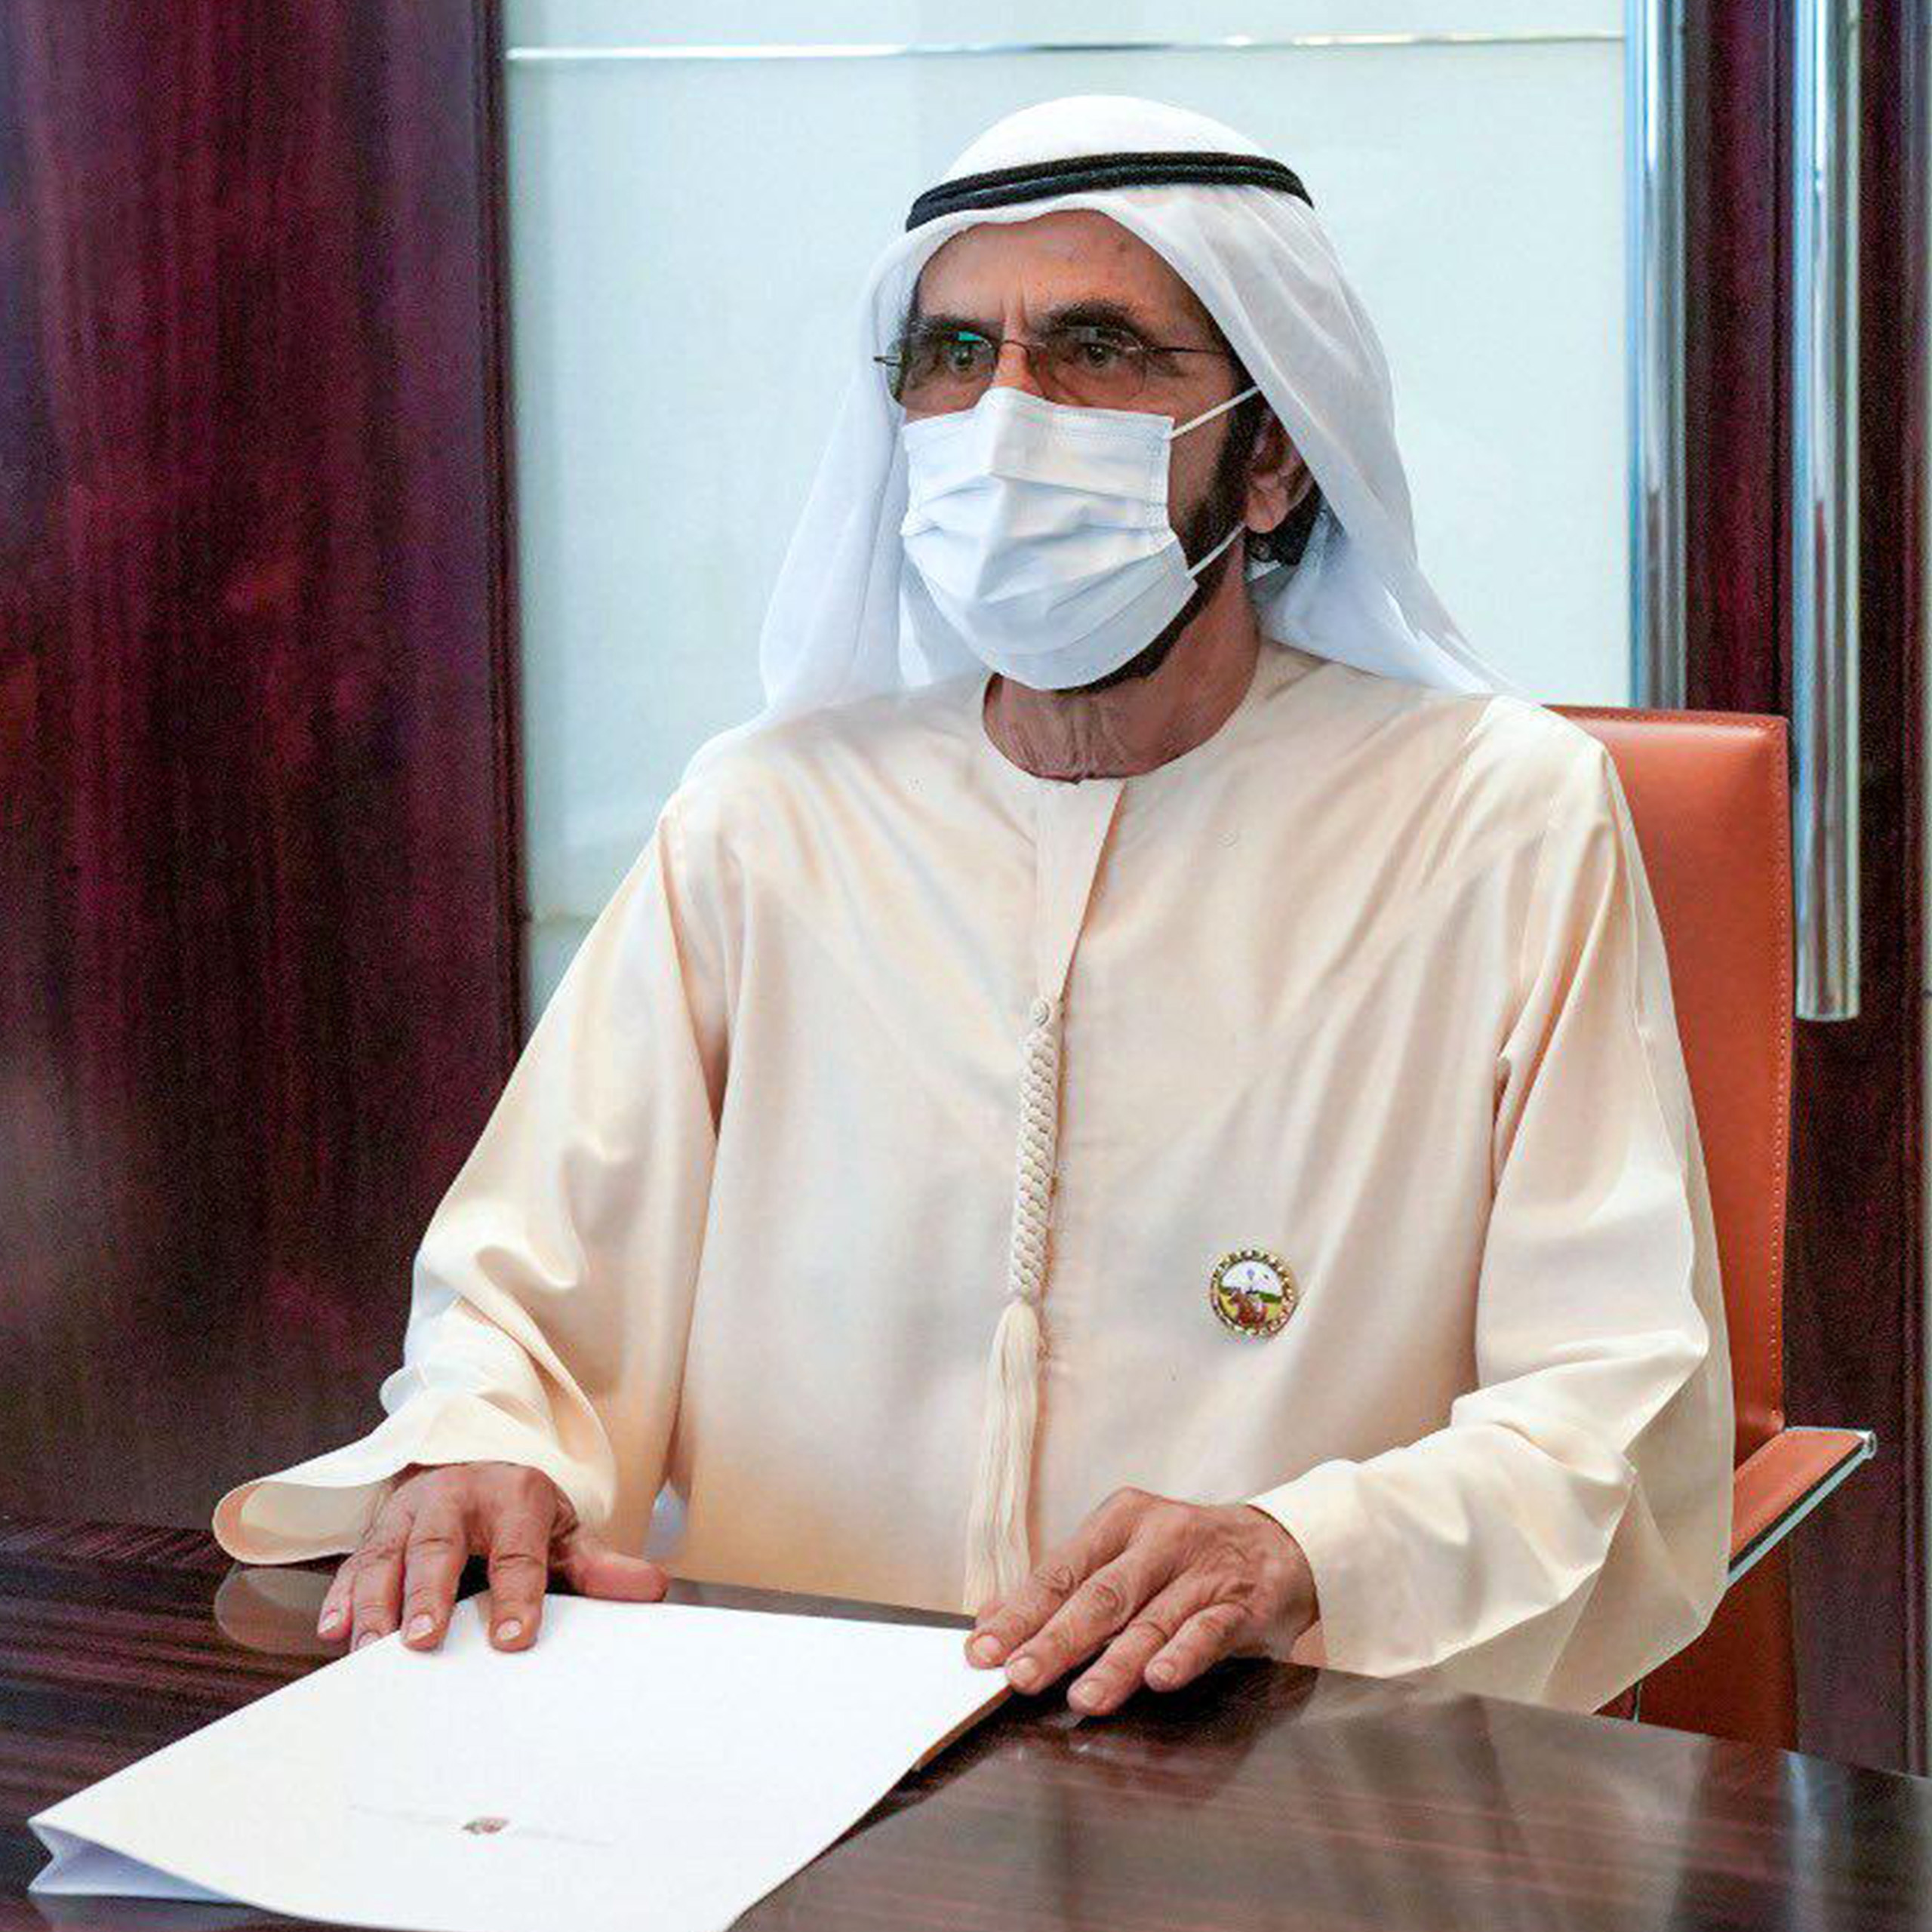 Paperworld Middle East Industry News - UAE will be the fastest country to recover says, Sheikh Mohammed bin rashid